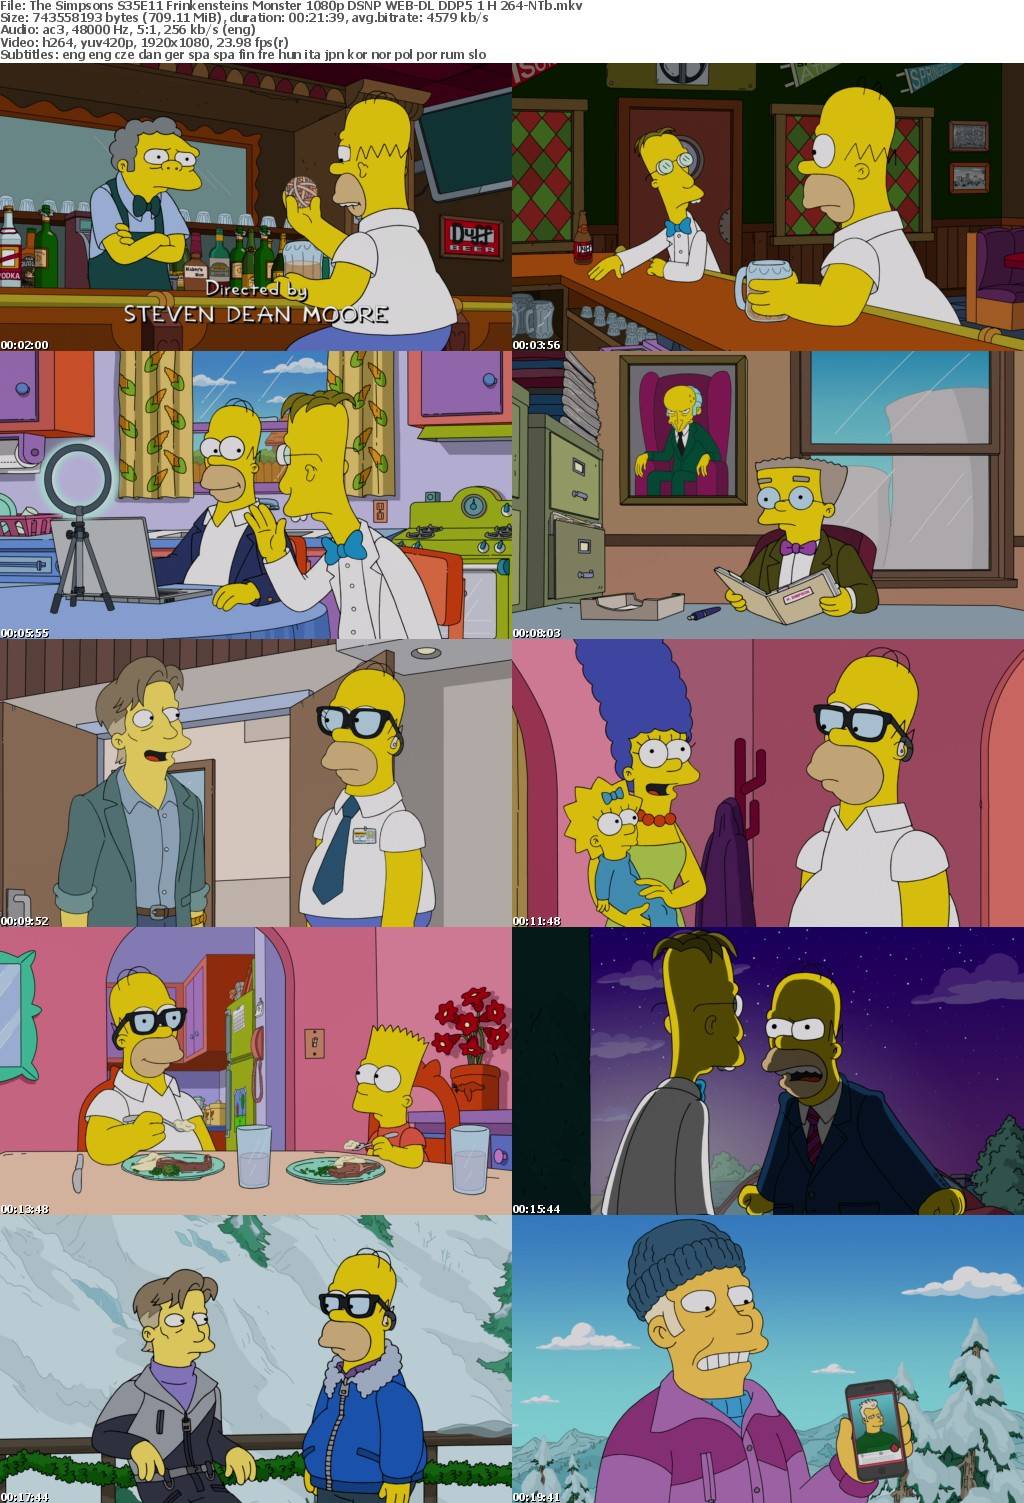 The Simpsons S35E11 Frinkensteins Monster 1080p DSNP WEB-DL DDP5 1 H 264-NTb